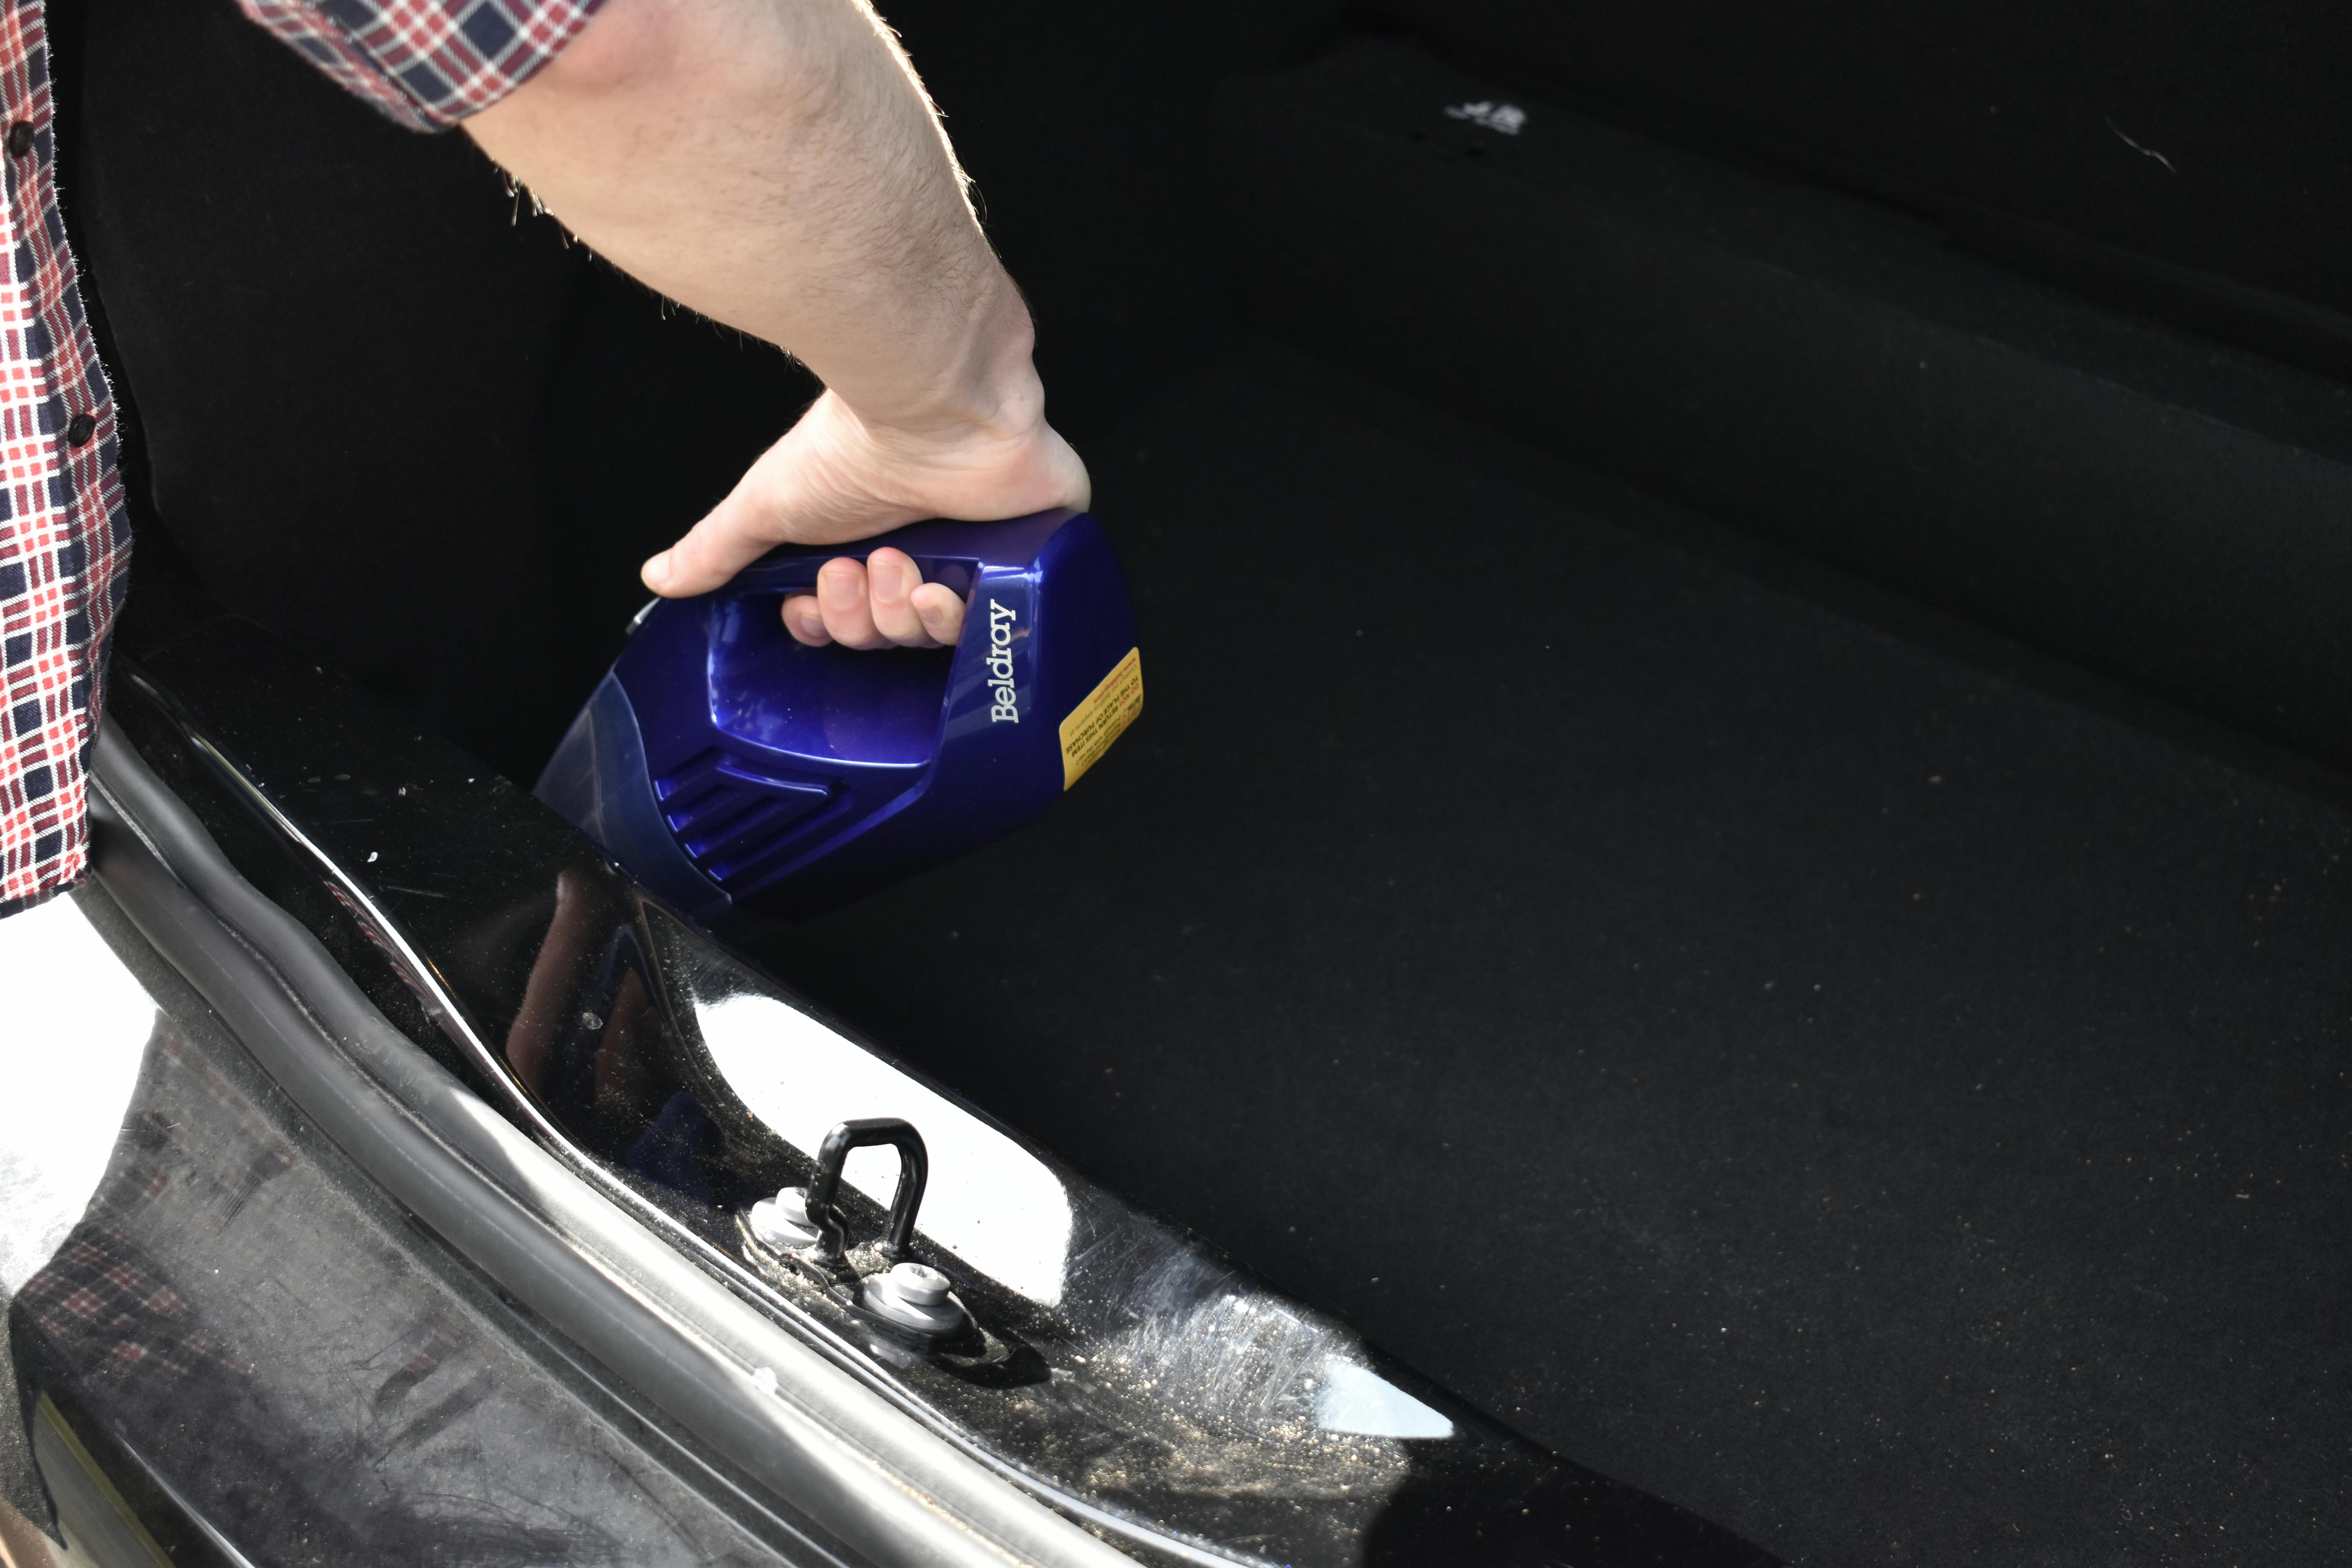 Using the Beldray in the boot of a car